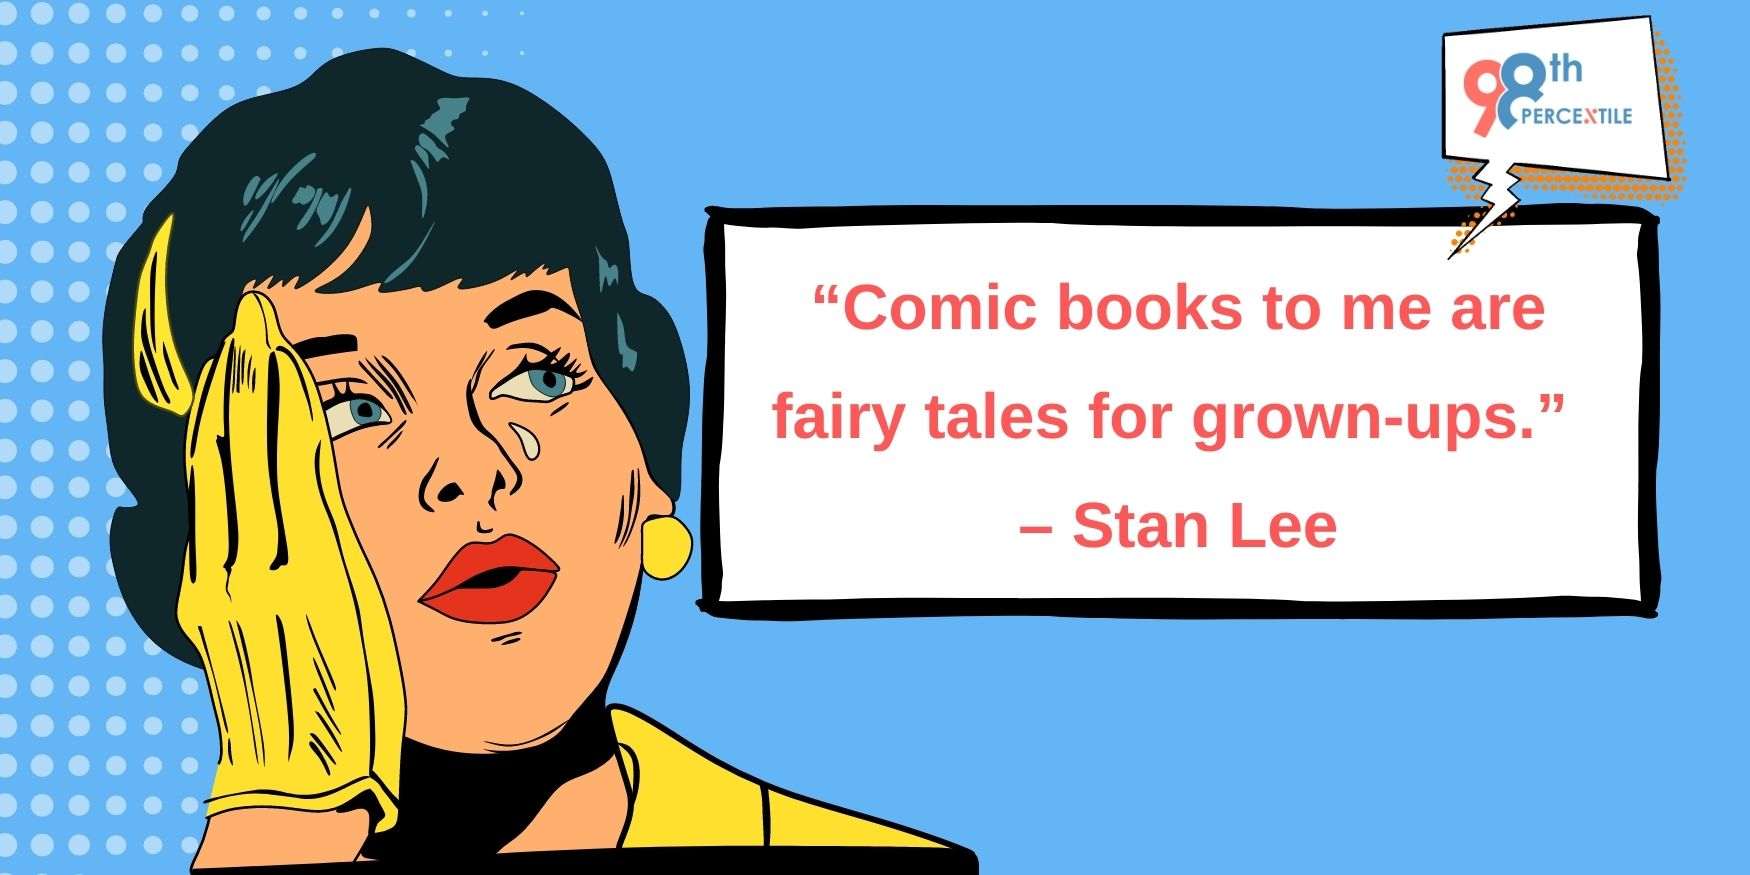 Comic books to me are fairy tales for grown-ups